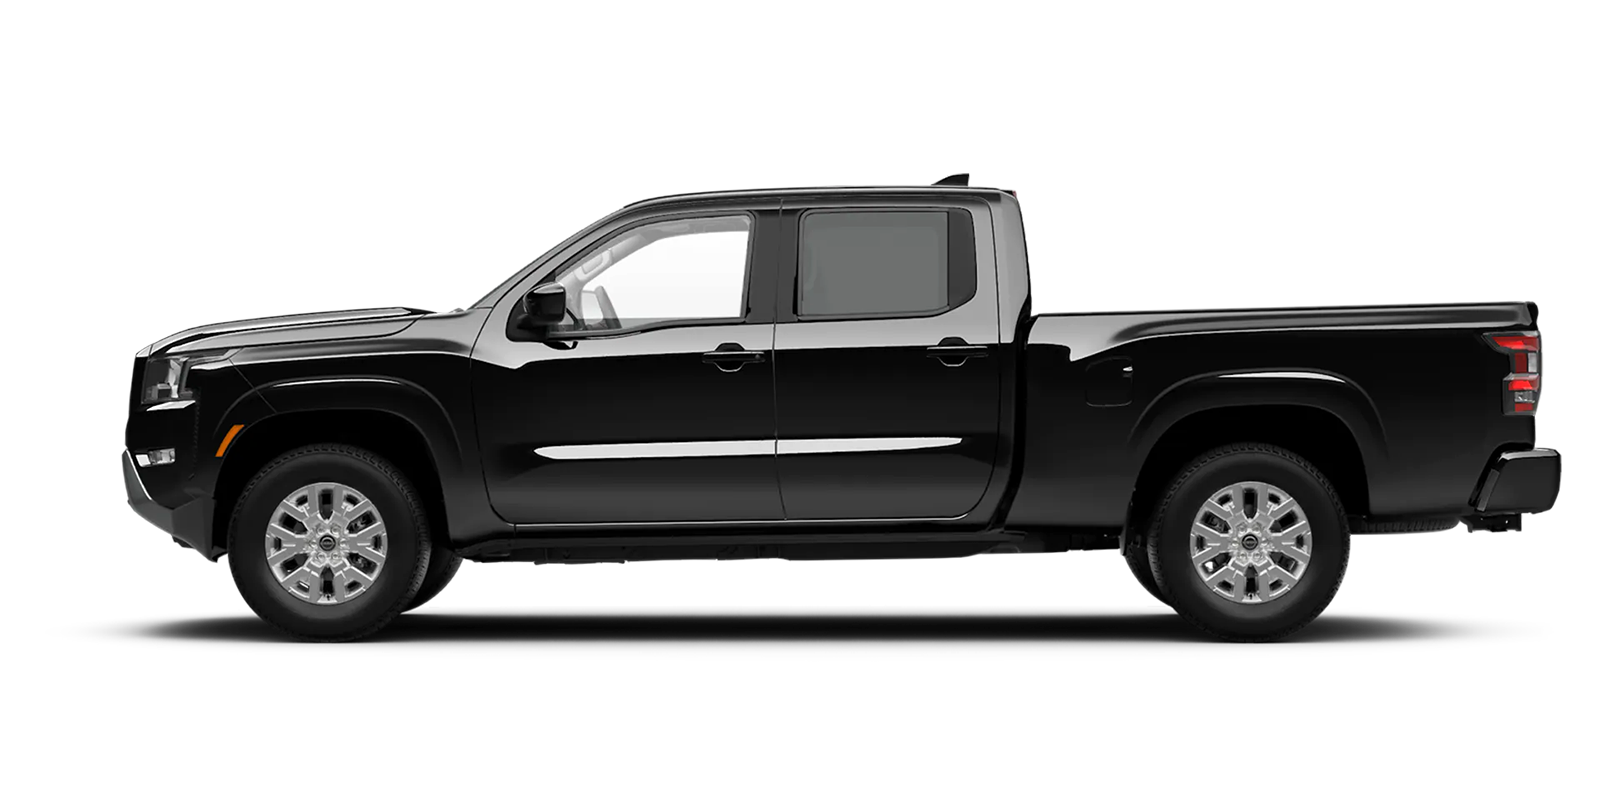 2022 Frontier Crew Cab Long Bed SV 4x2 in Super Black | Auffenberg Nissan in Shiloh IL